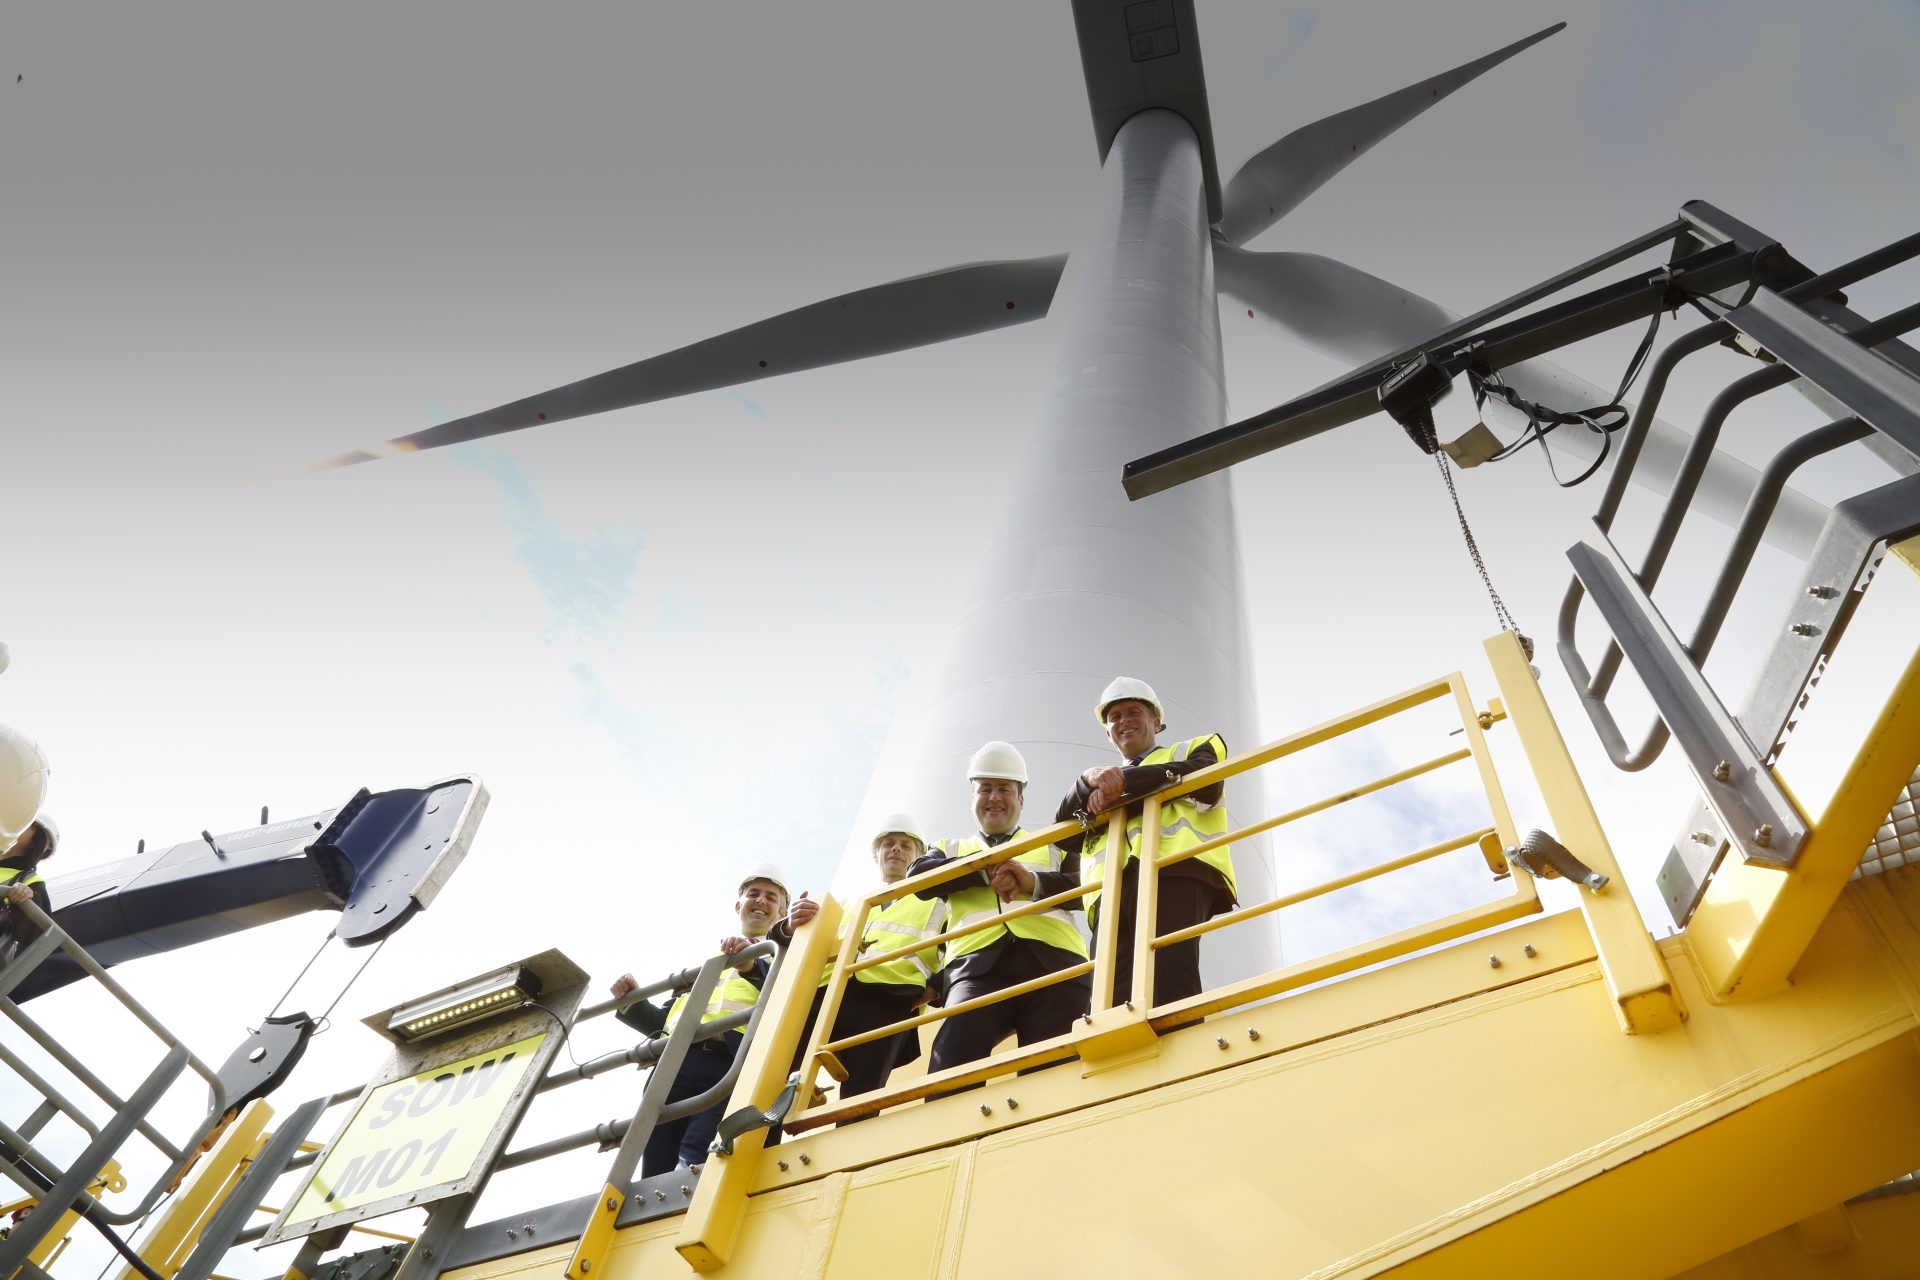 Workmen stand on the base platform of a wind turbine and look down, the wind turbine looms in the background.